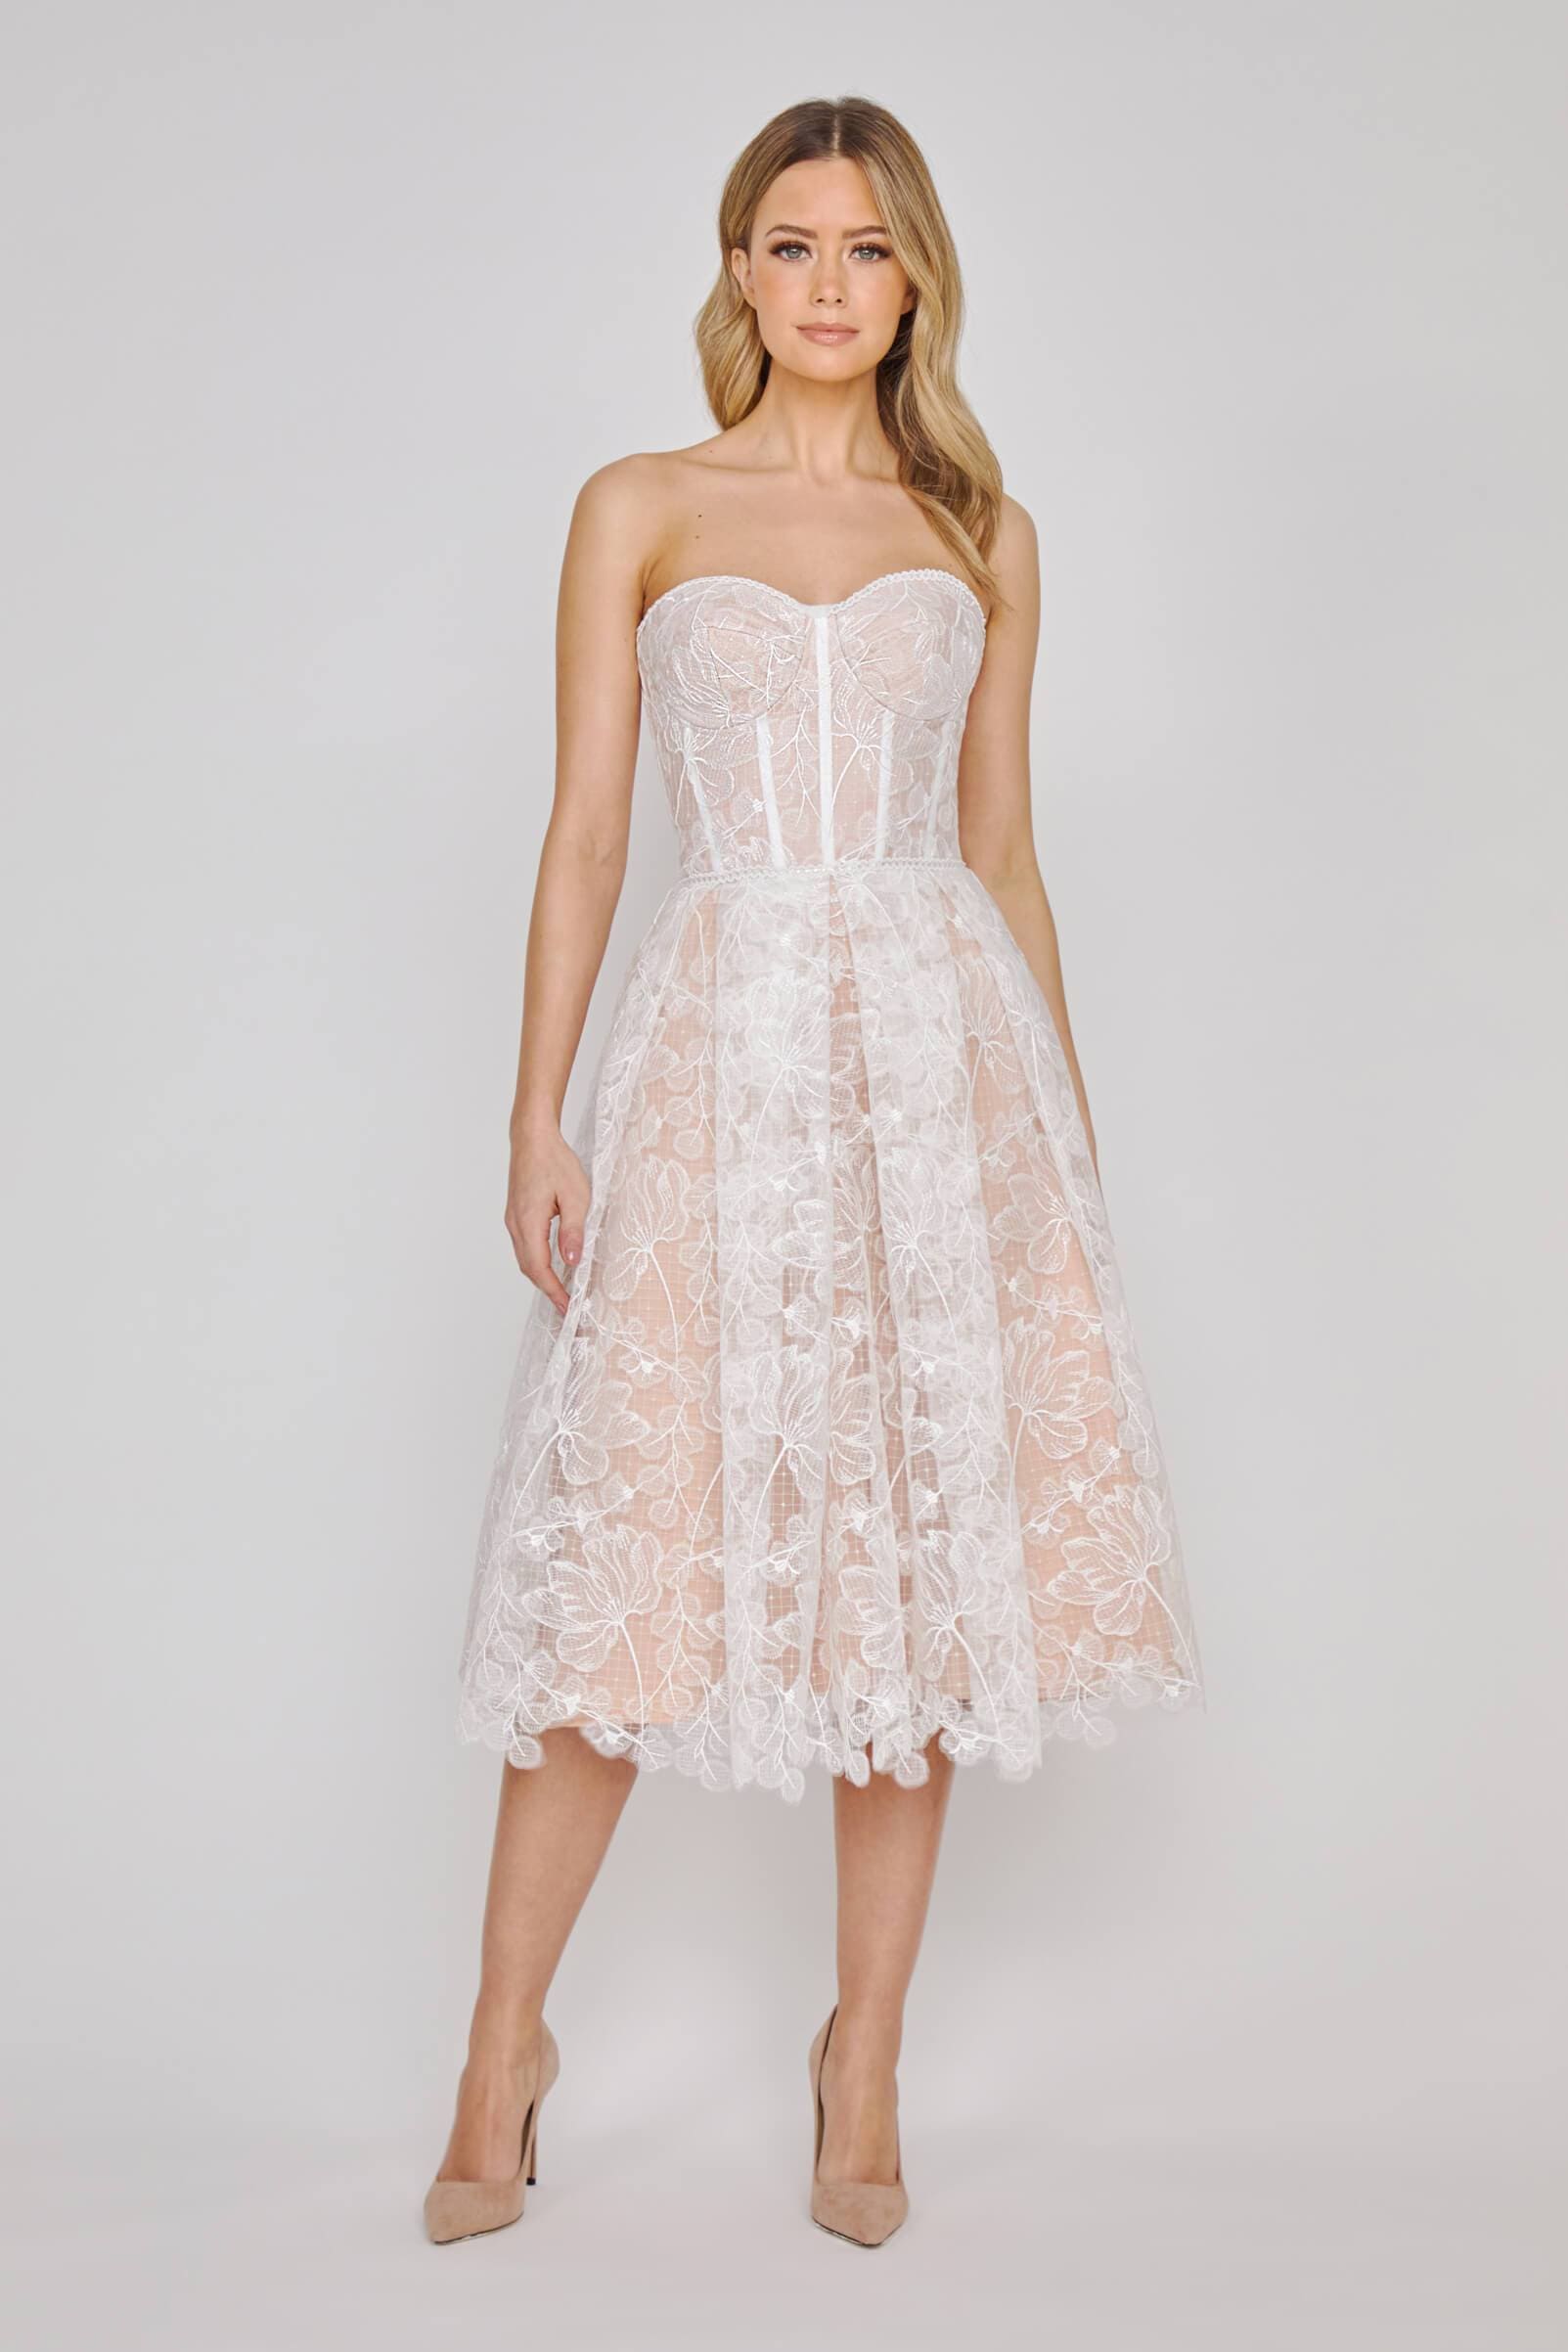 bride outfits, white outfits, bridal fashion, rehearsal dinner dress, bachelorette party dress, wedding shower dress, bridal shower dress, rehearsal dinner outfit, 2021 bride, blogger bride, 2021 blogger bride, 2021 wedding, little white dress, white dress wedding, olivia rink wedding ideas, olivia rink wedding, olivia rink rehearsal